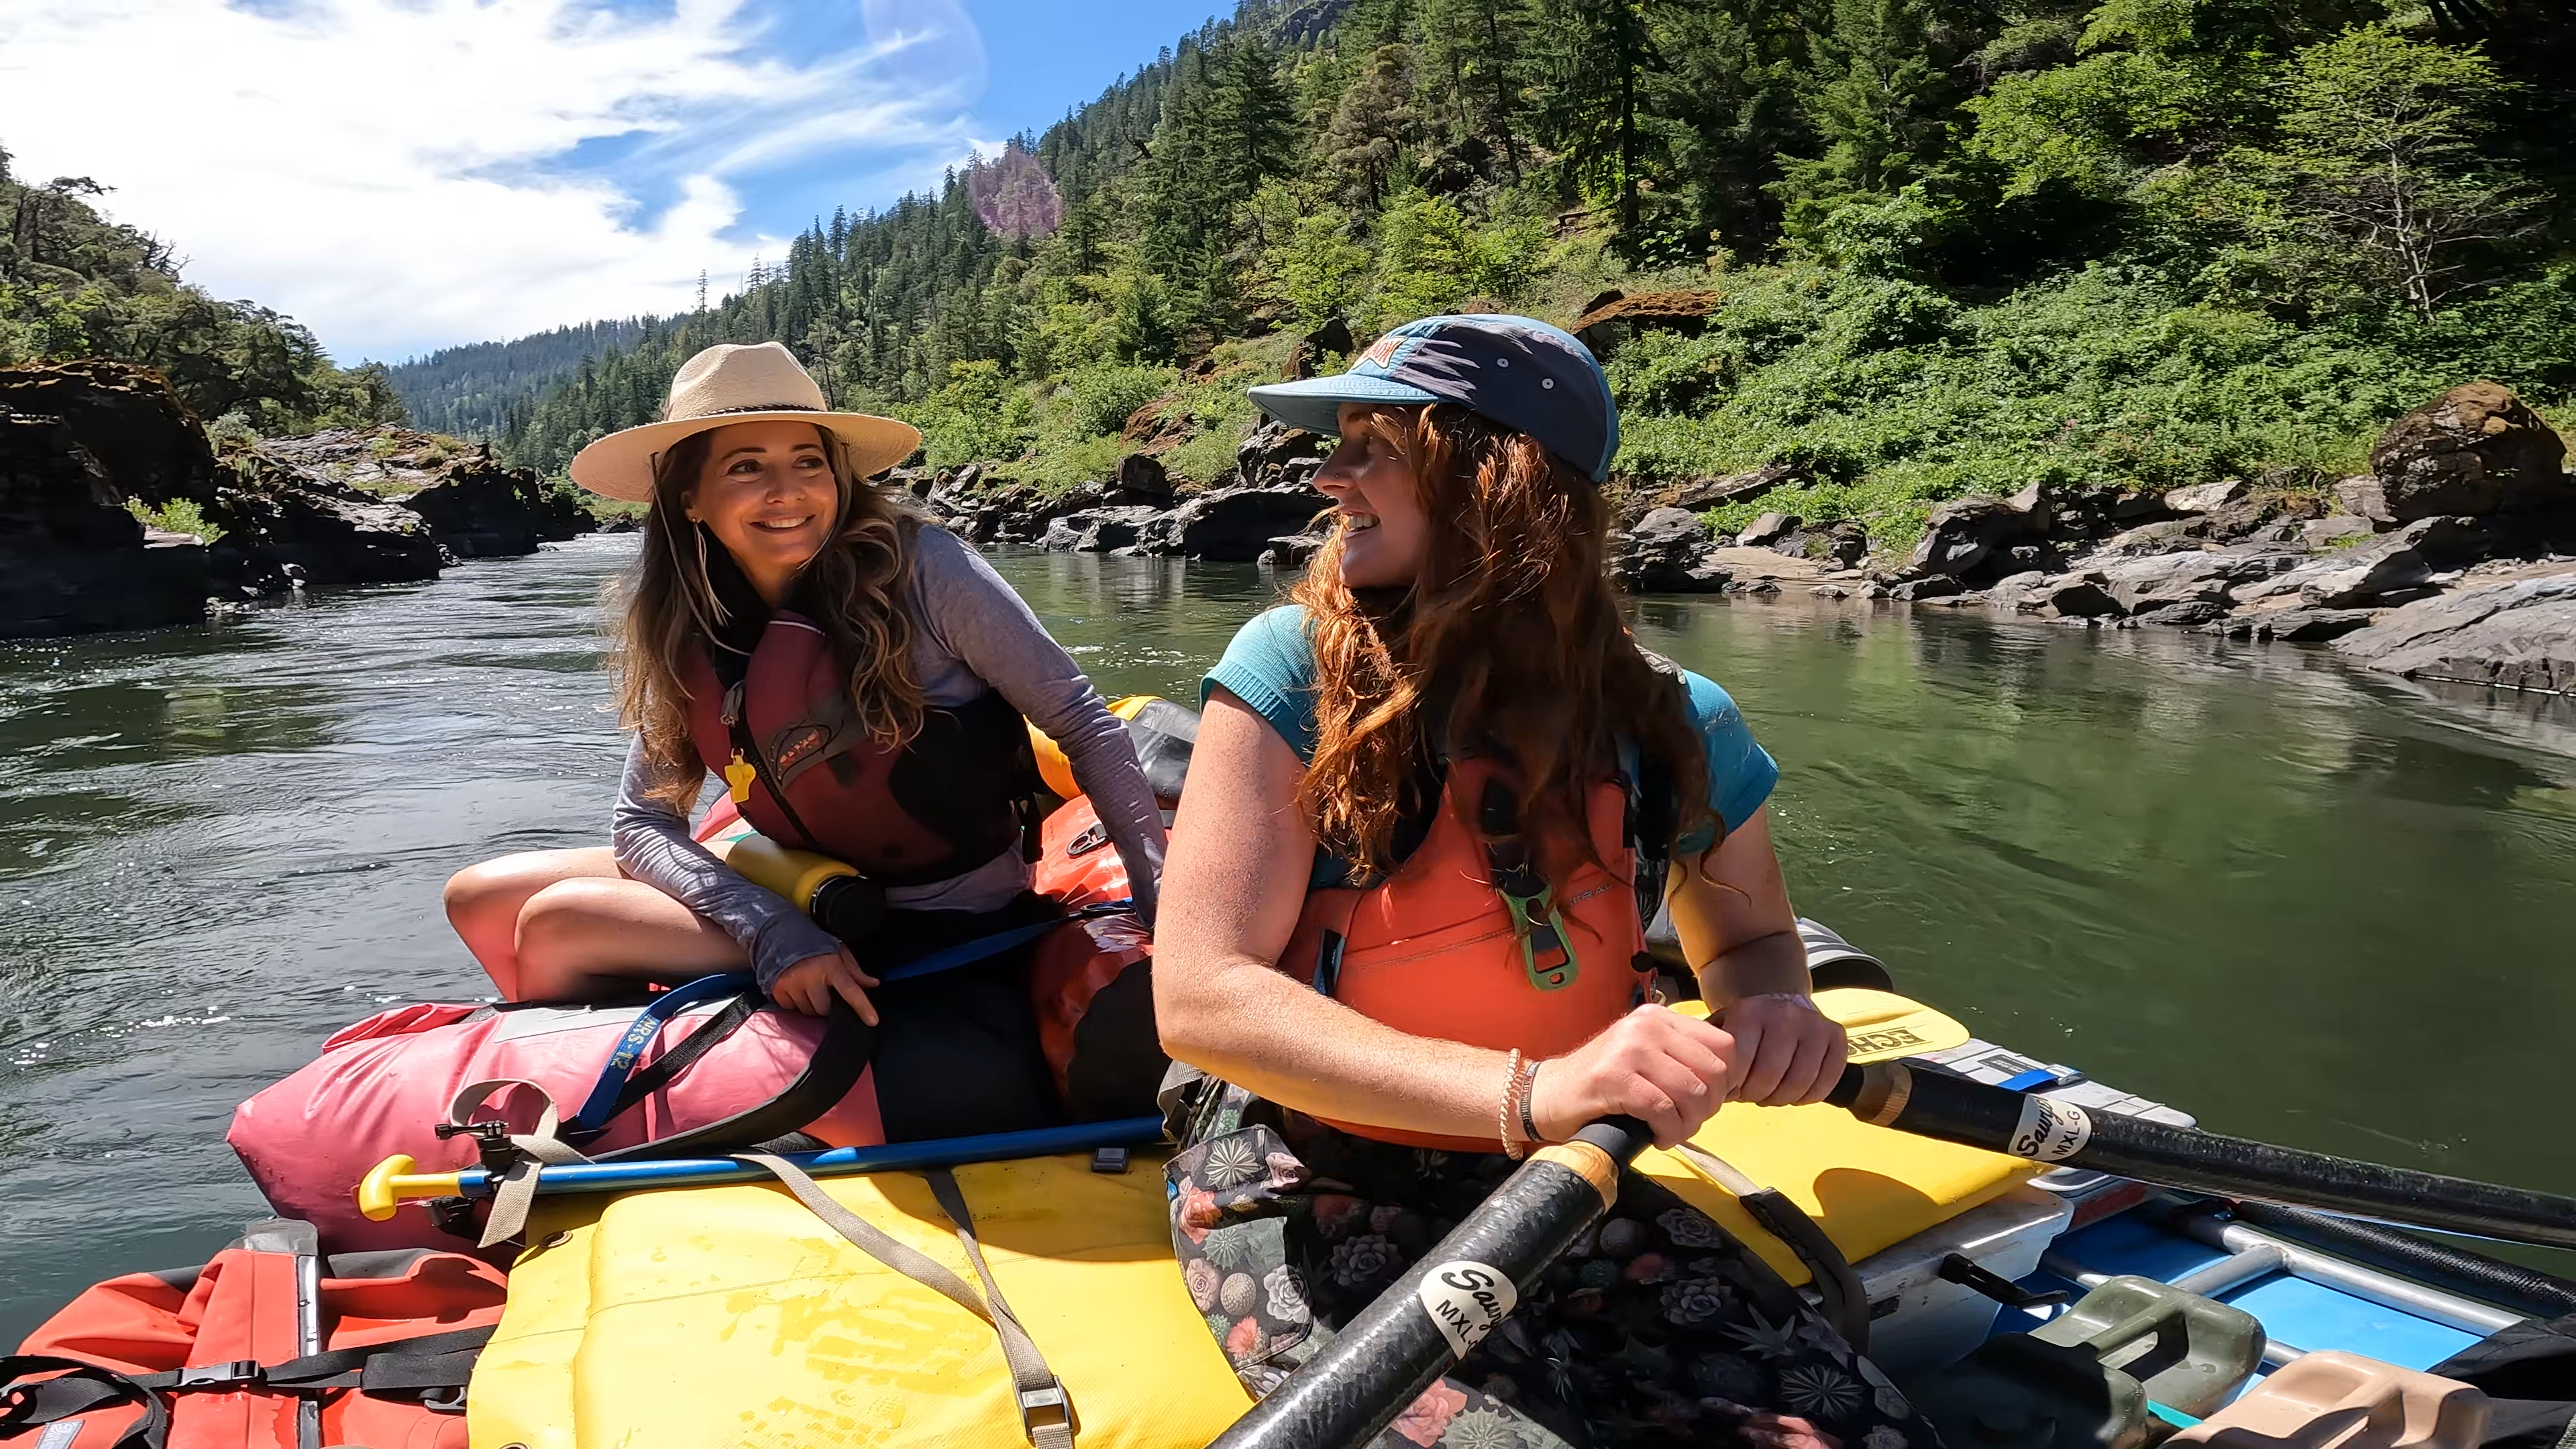 Tillie Walton amd River Guide Tate Tomlinson on the Rogue River.